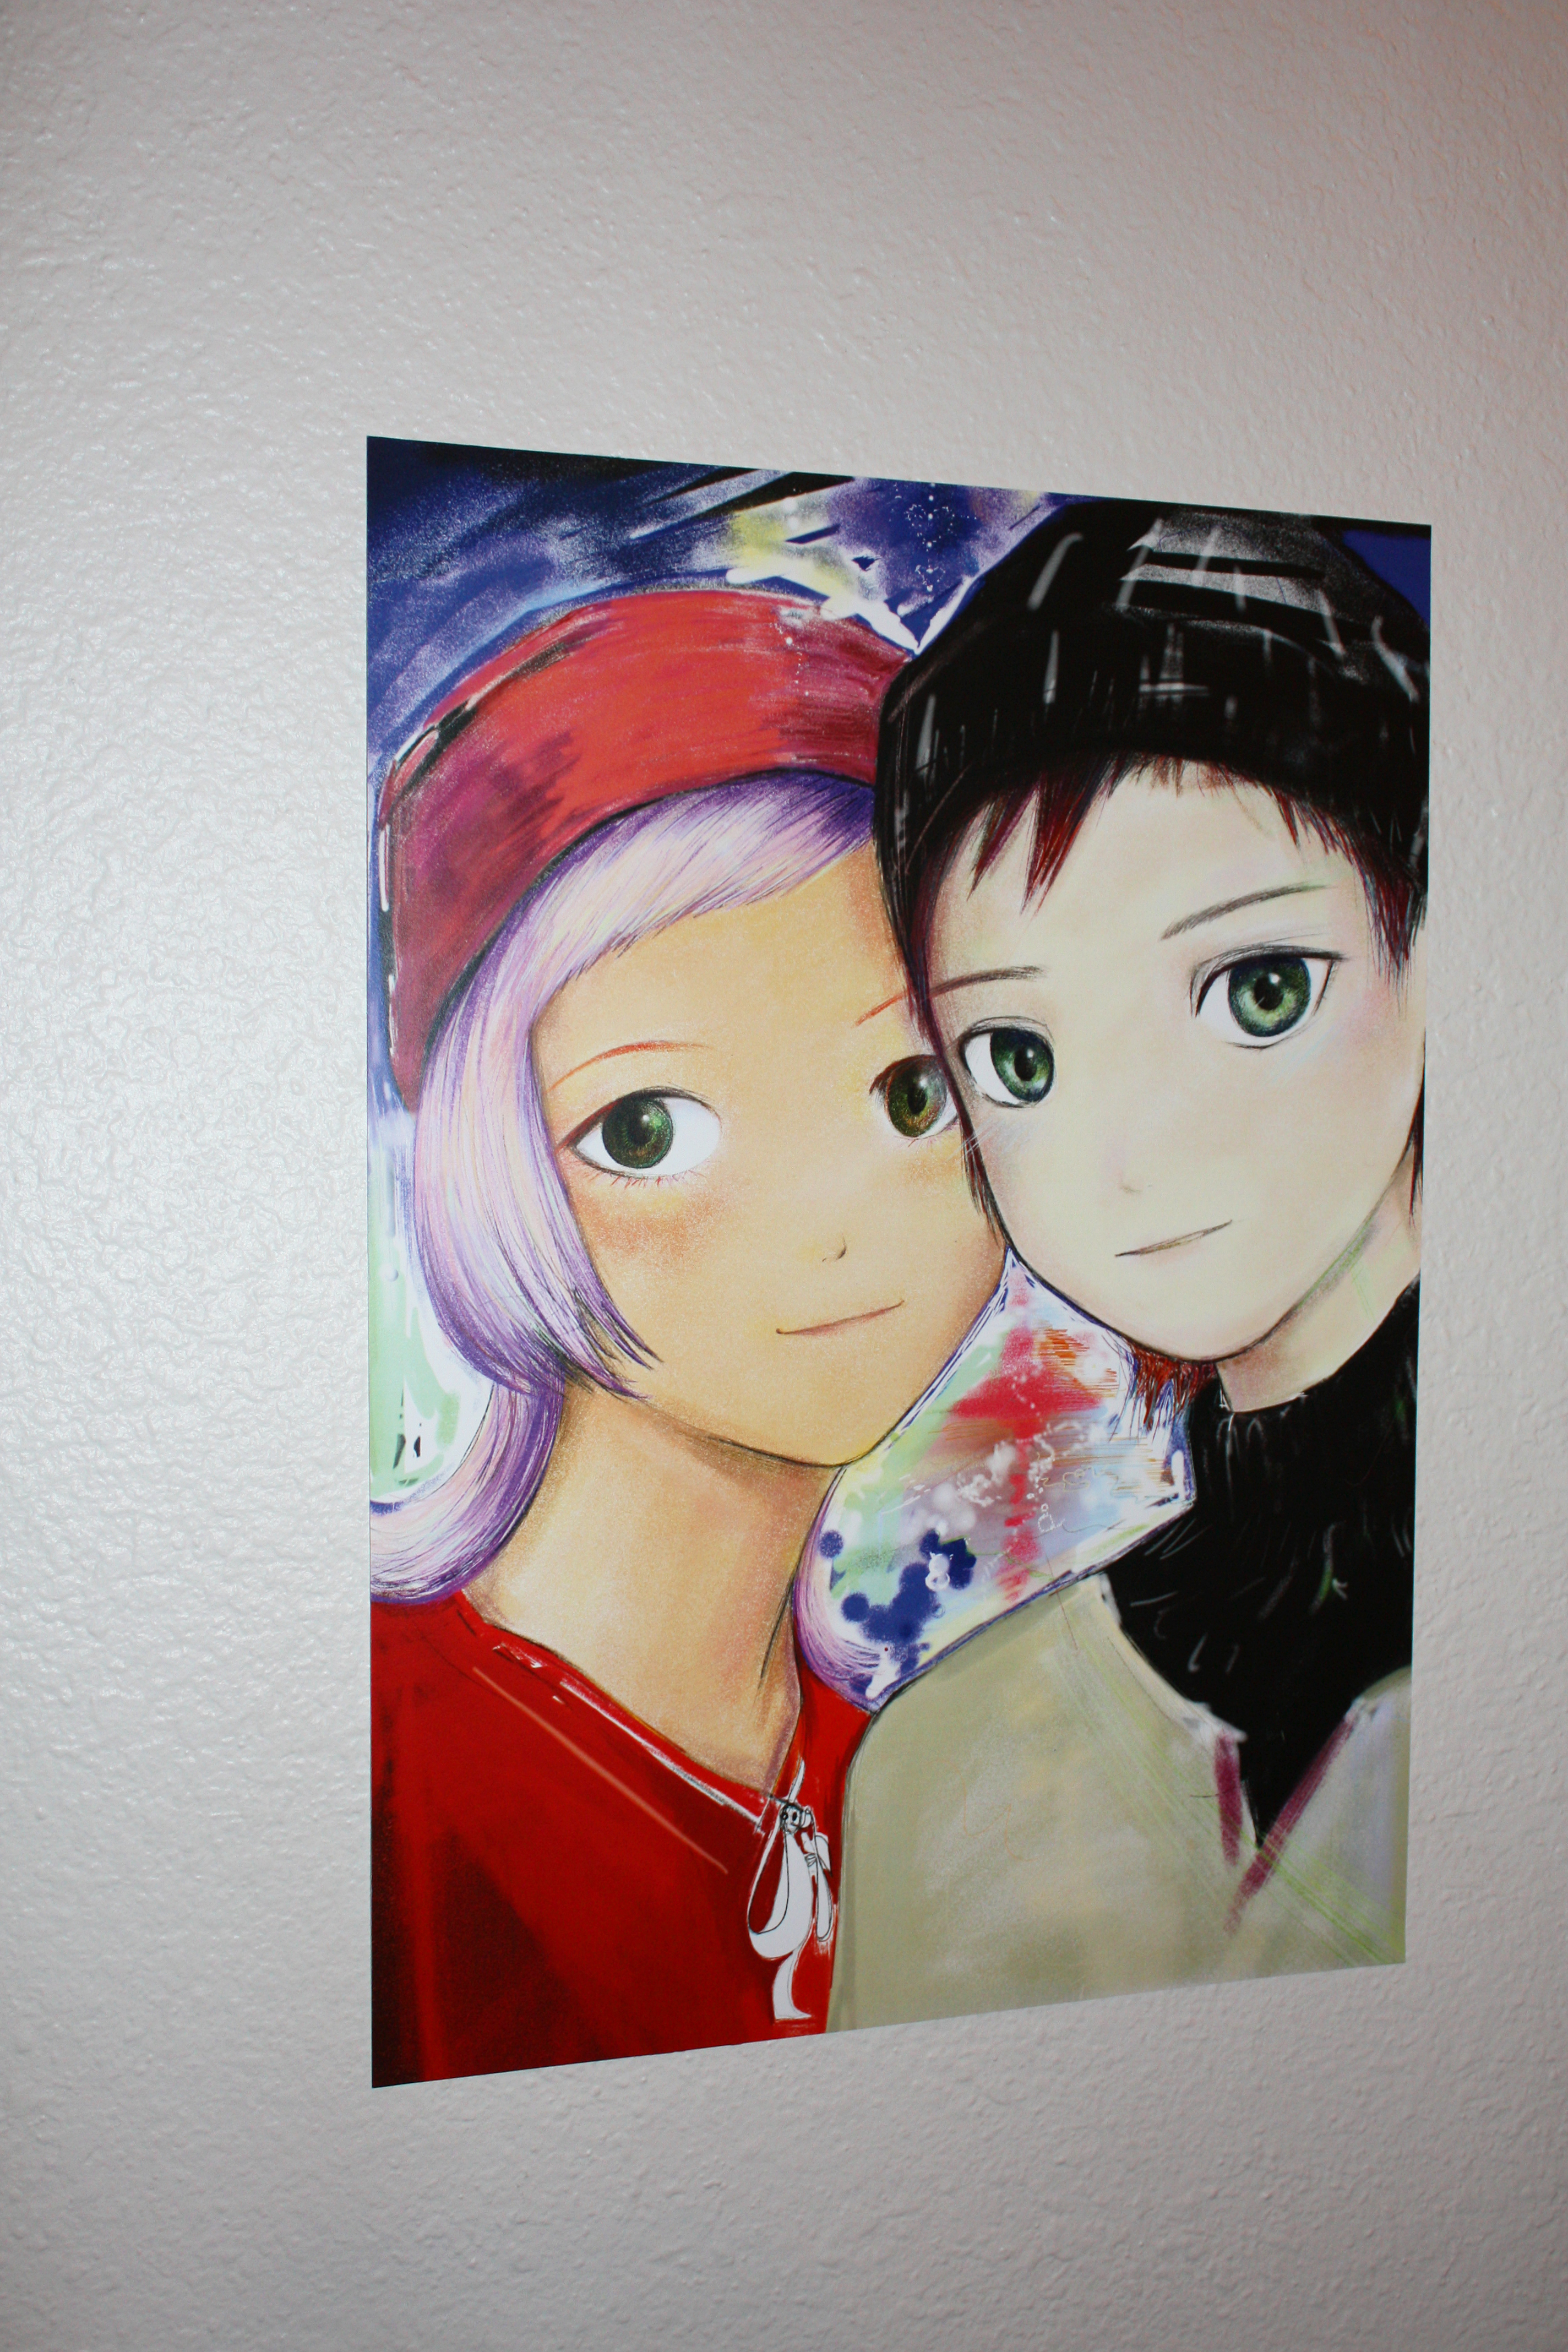 Detail of an anime boy and girl smiling hung on a white wall